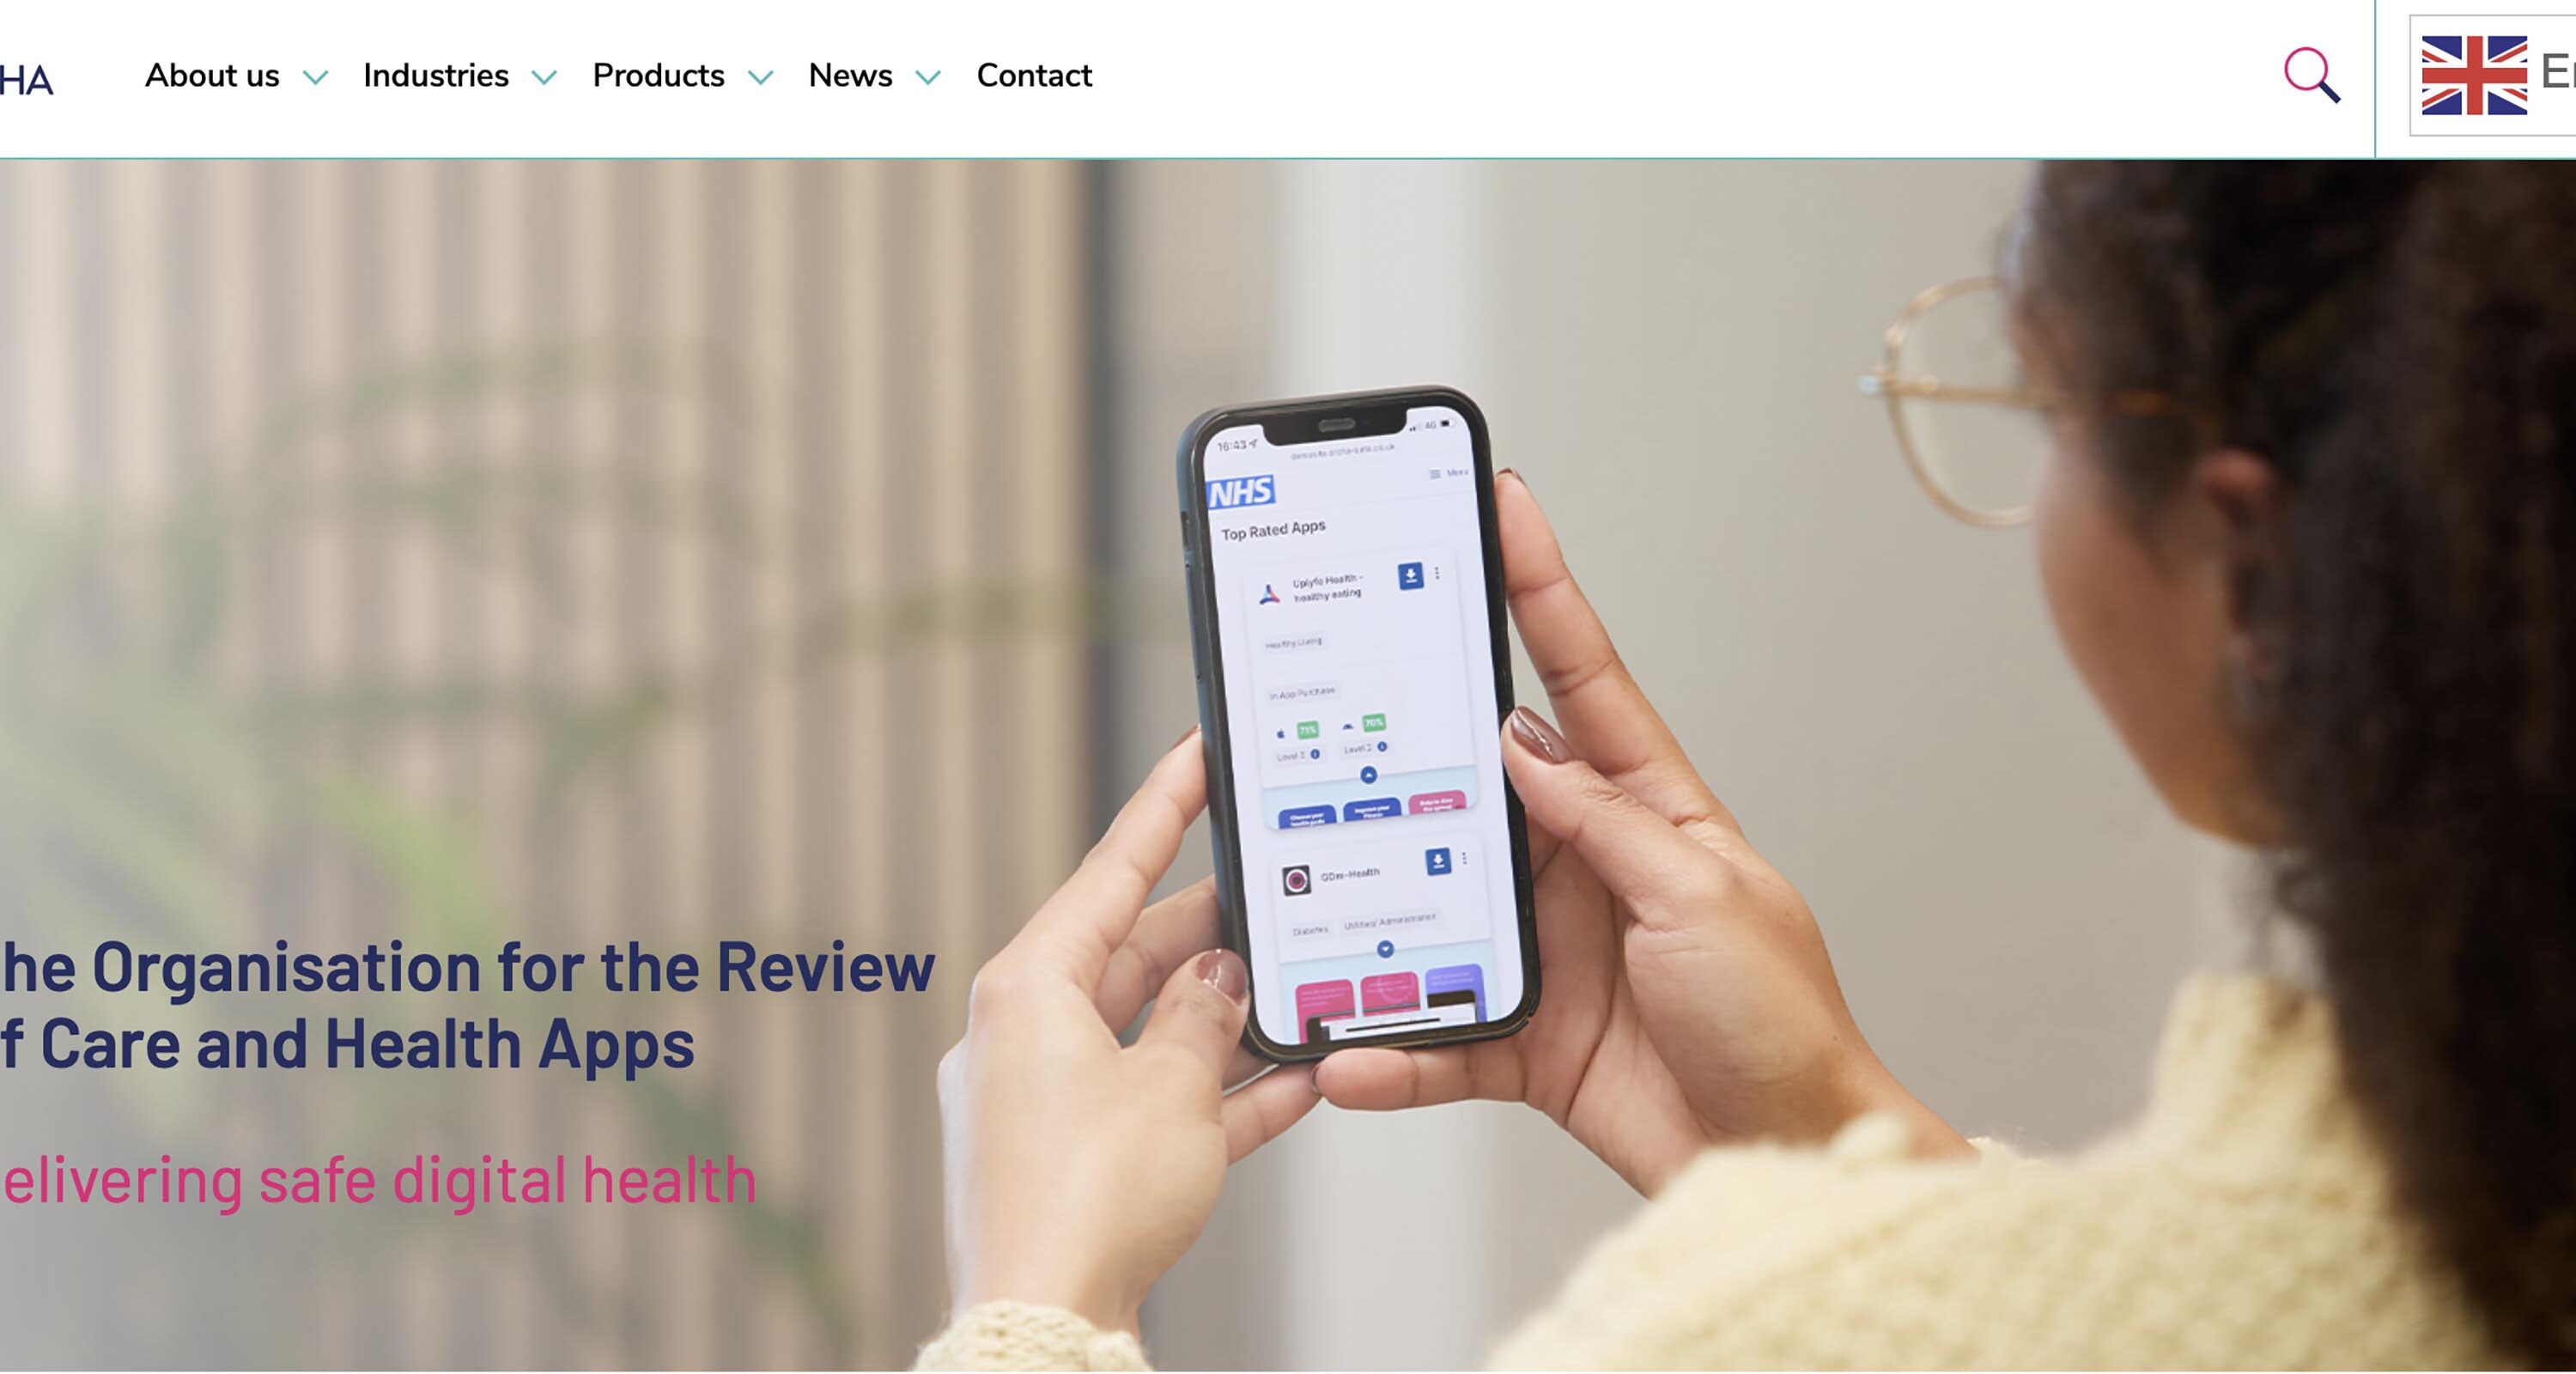 Organisation for the Review of Care and Health Apps